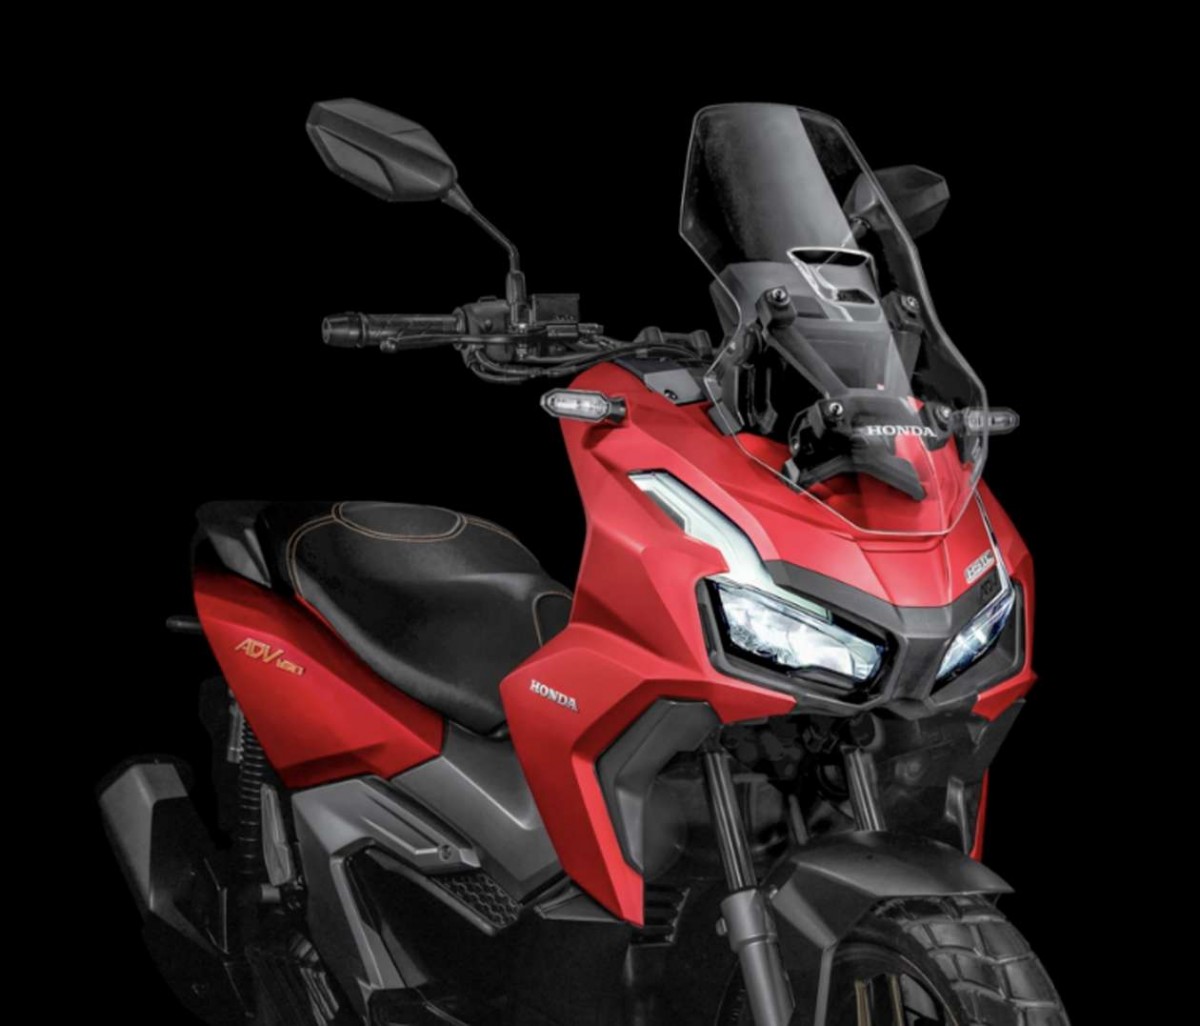 ‘Honda SH backpacking version’ launched, easily becoming a hot commodity thanks to its attractive price and beautiful design